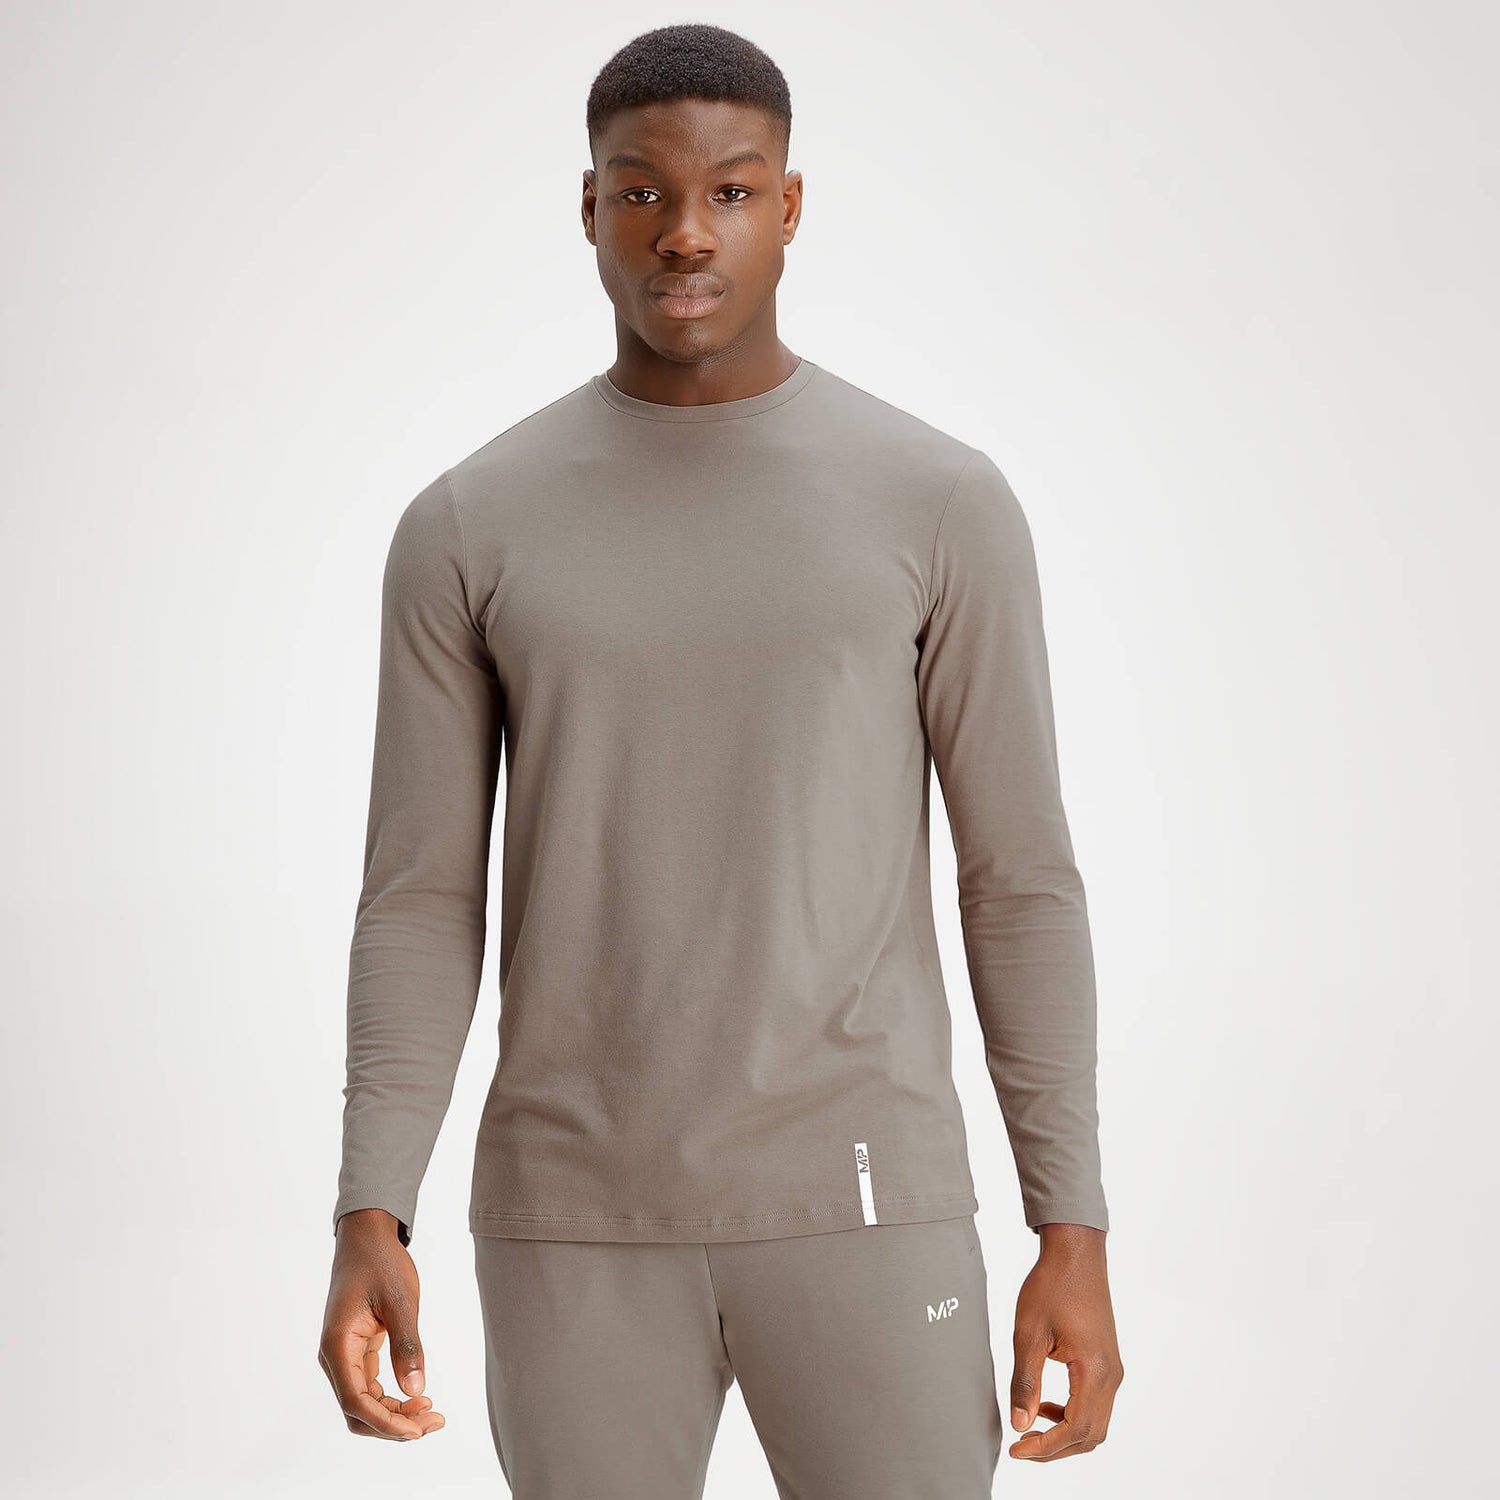 MP Men's Luxe Classic Long Sleeve Crew Top - Taupe